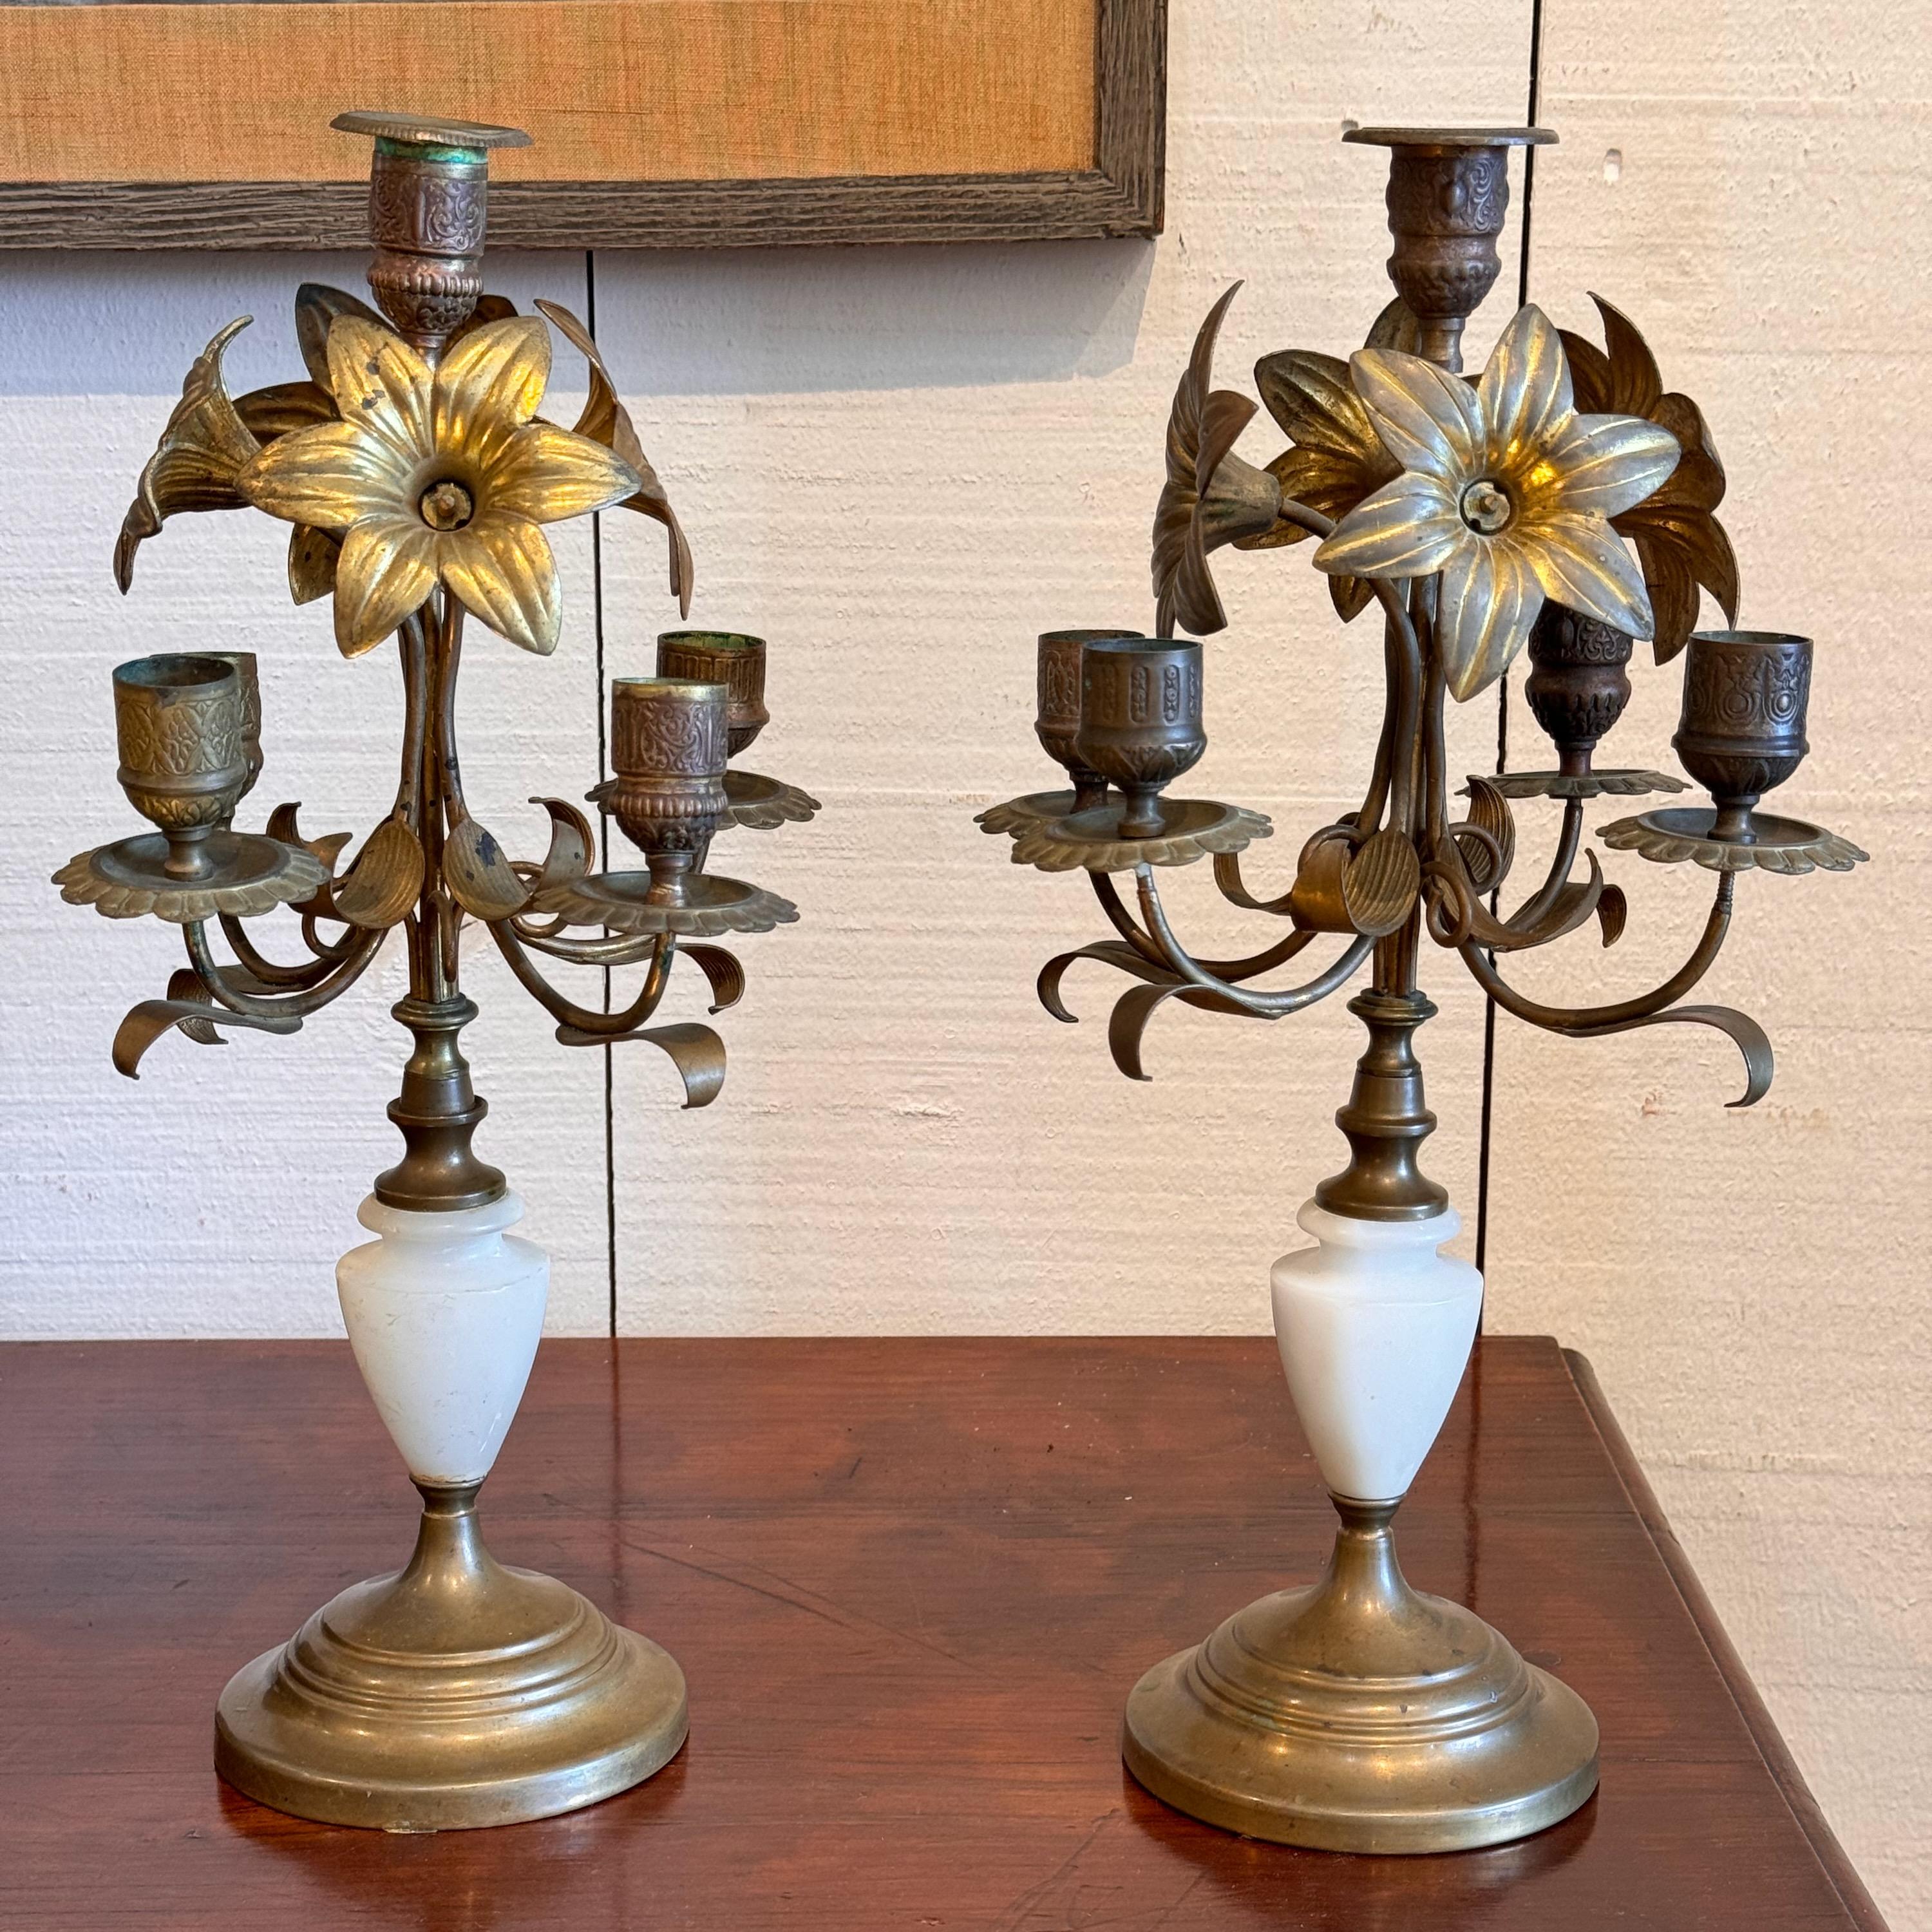 French Late 19th Century Brass and Marble Candle Holders - a Pair For Sale